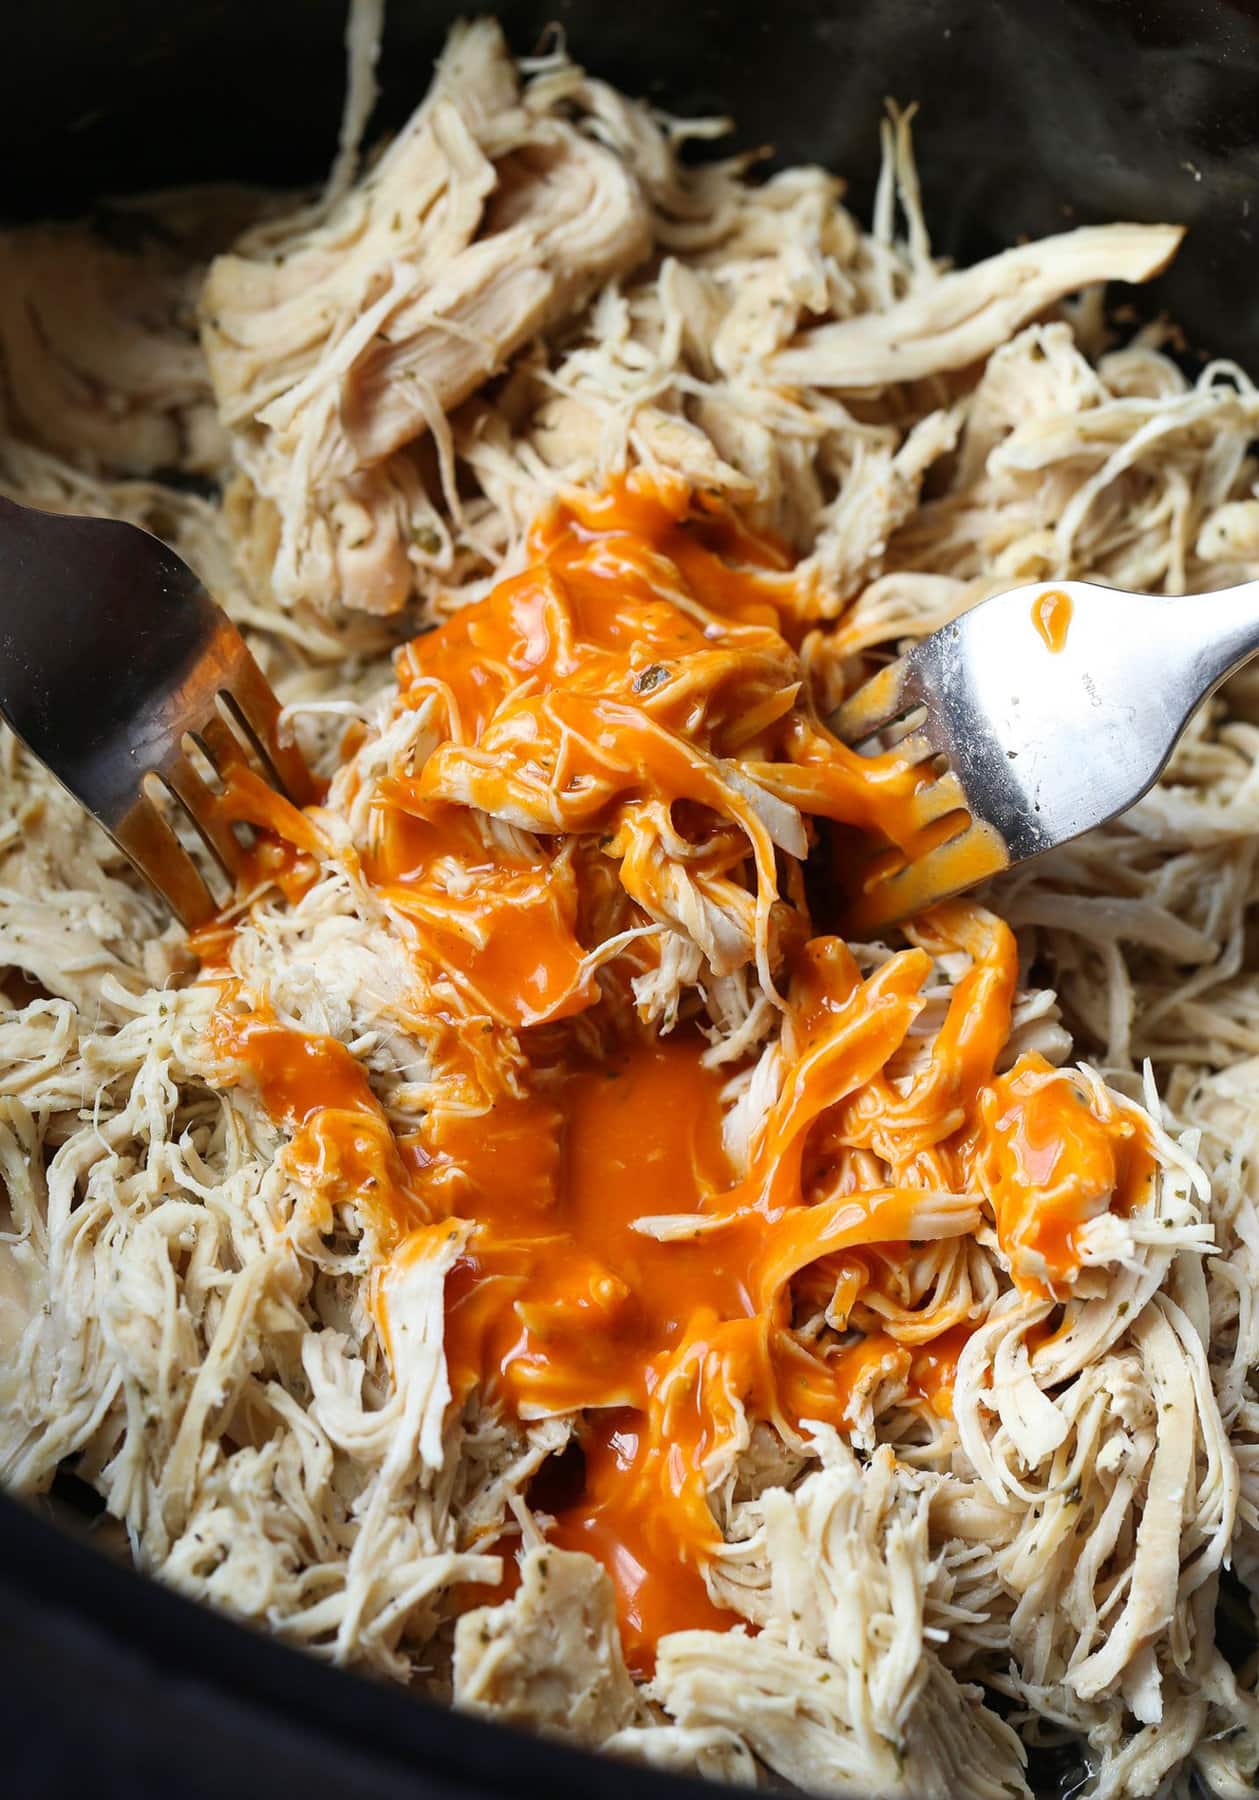 Shredded chicken topped with buffalo sauce